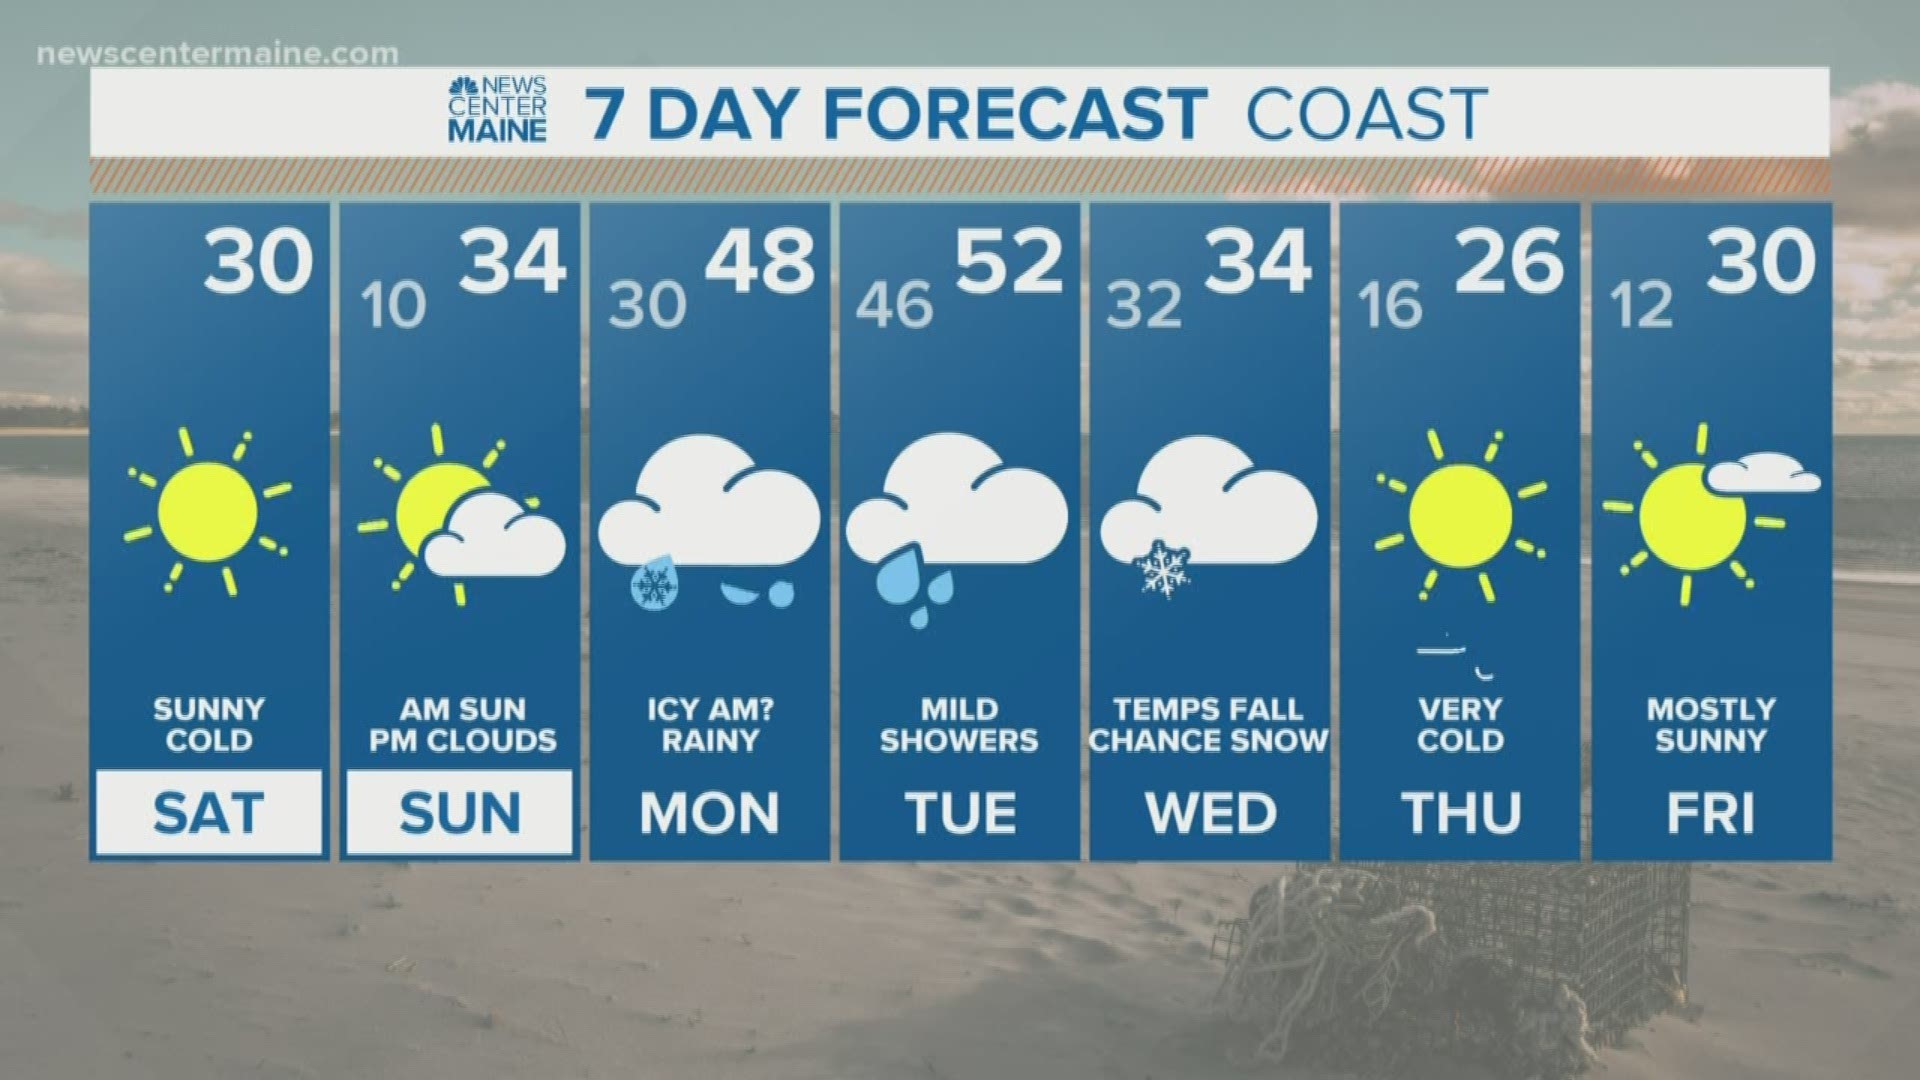 NEWS CENTER Maine Weather Video Forecast. Updated on 12/7/19 at 7:15 am.